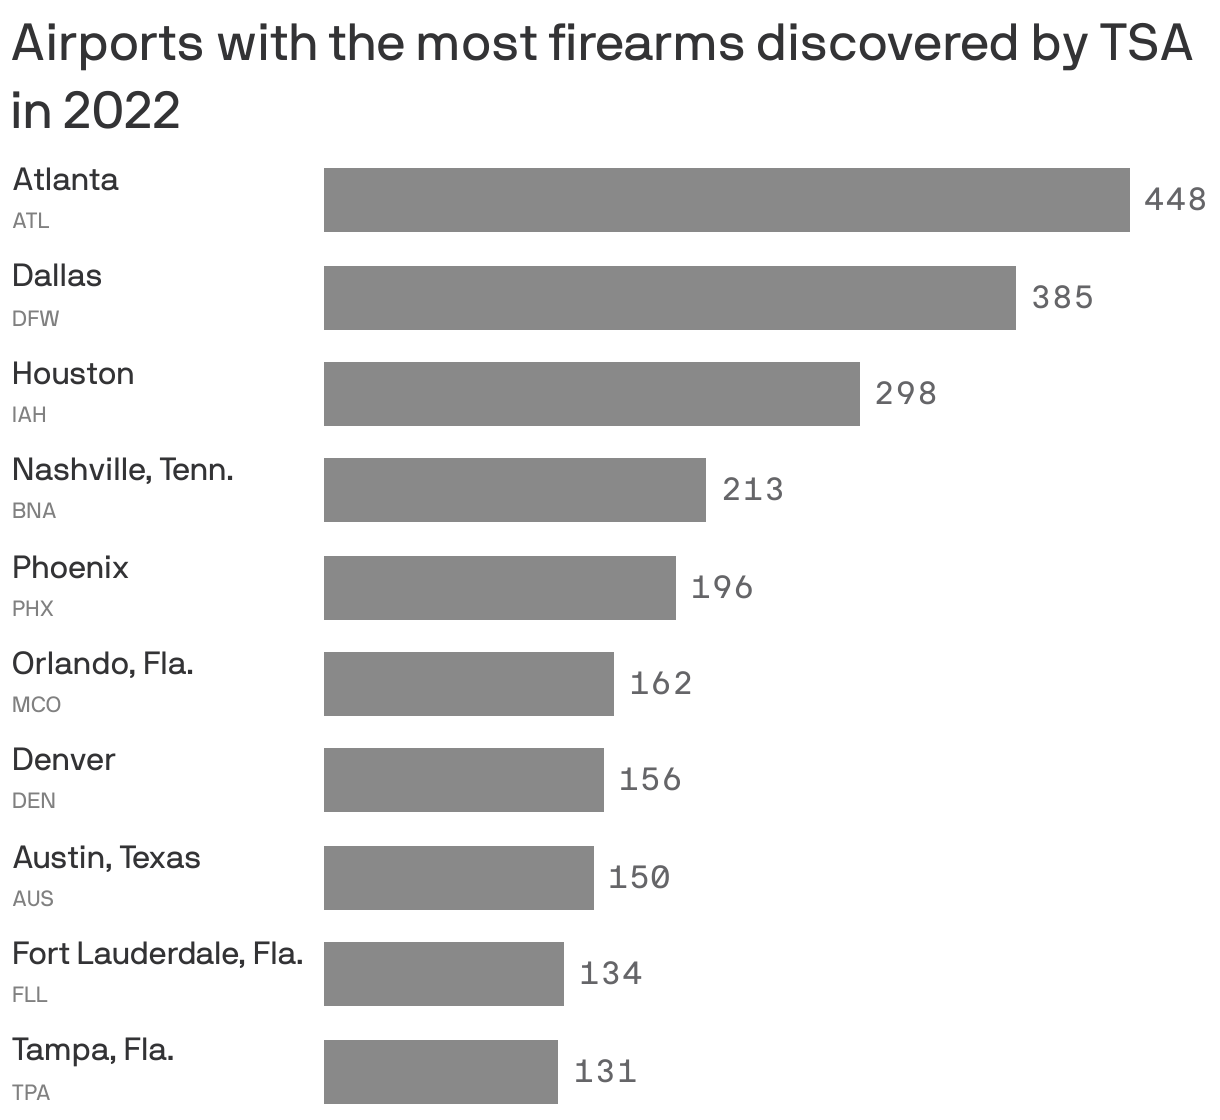 Airports with the most firearms discovered by TSA in 2022